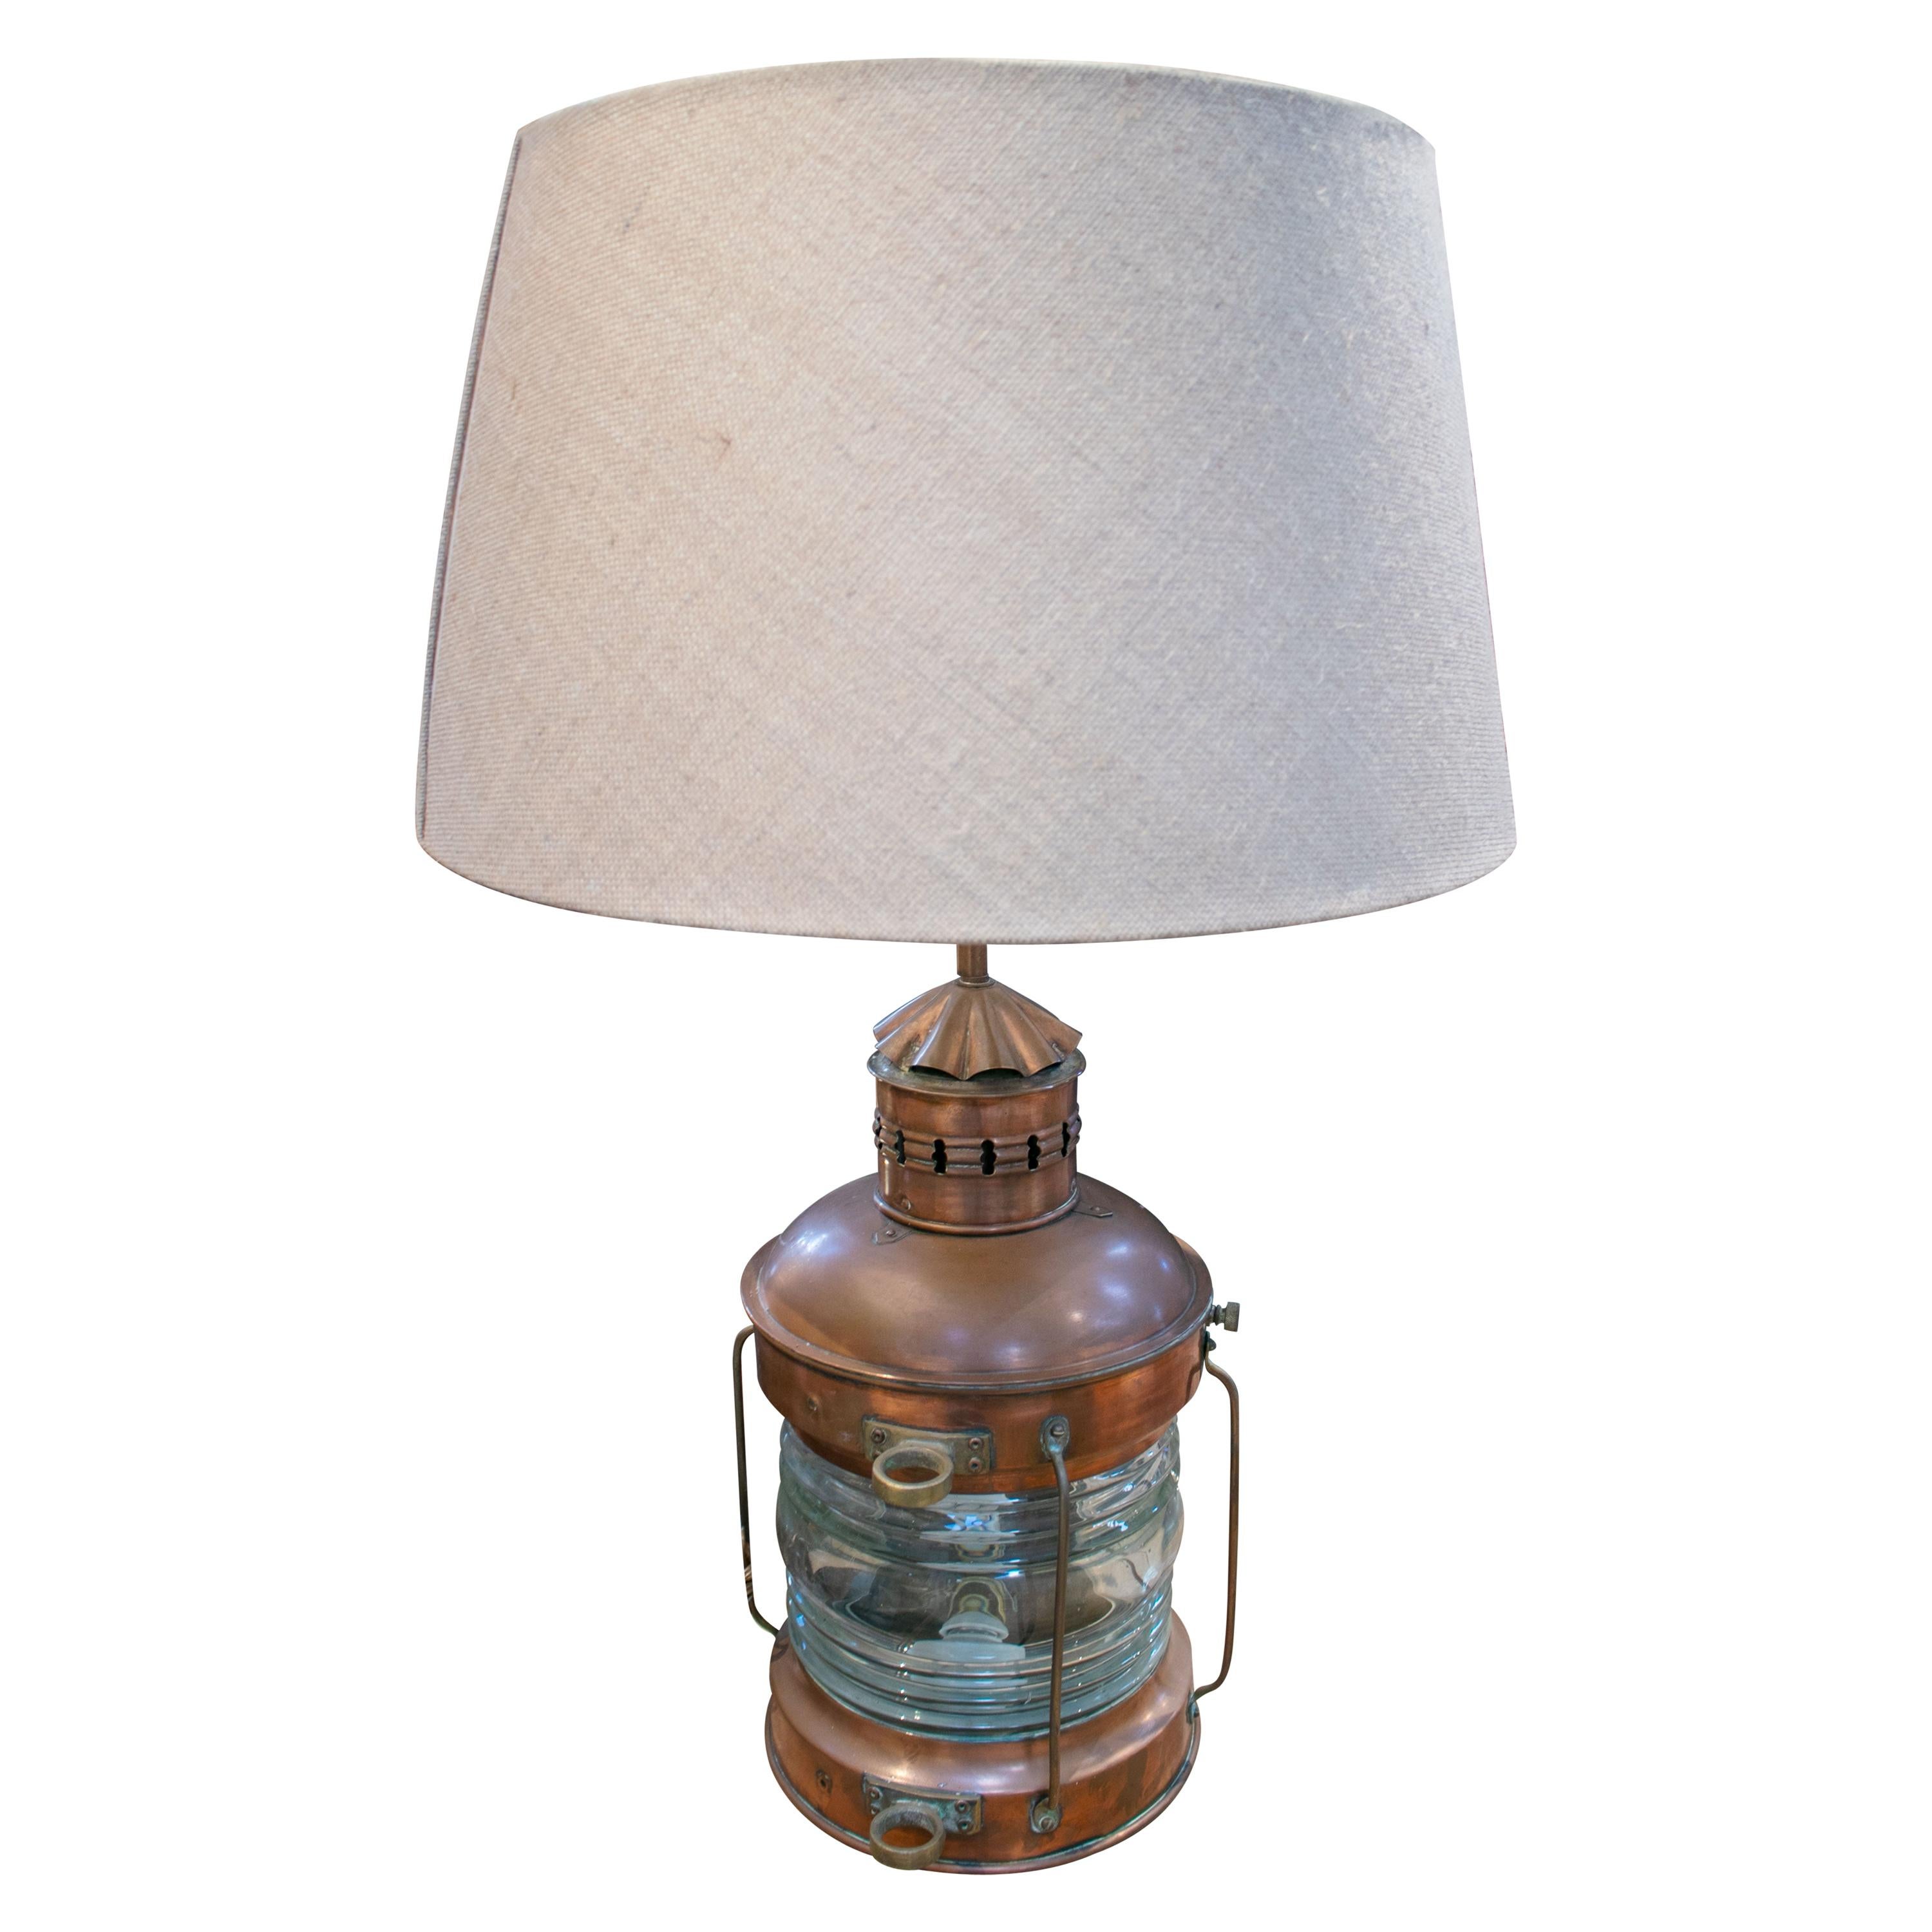 1950s English Bronze and Glass Ship Table Lamp with Shade